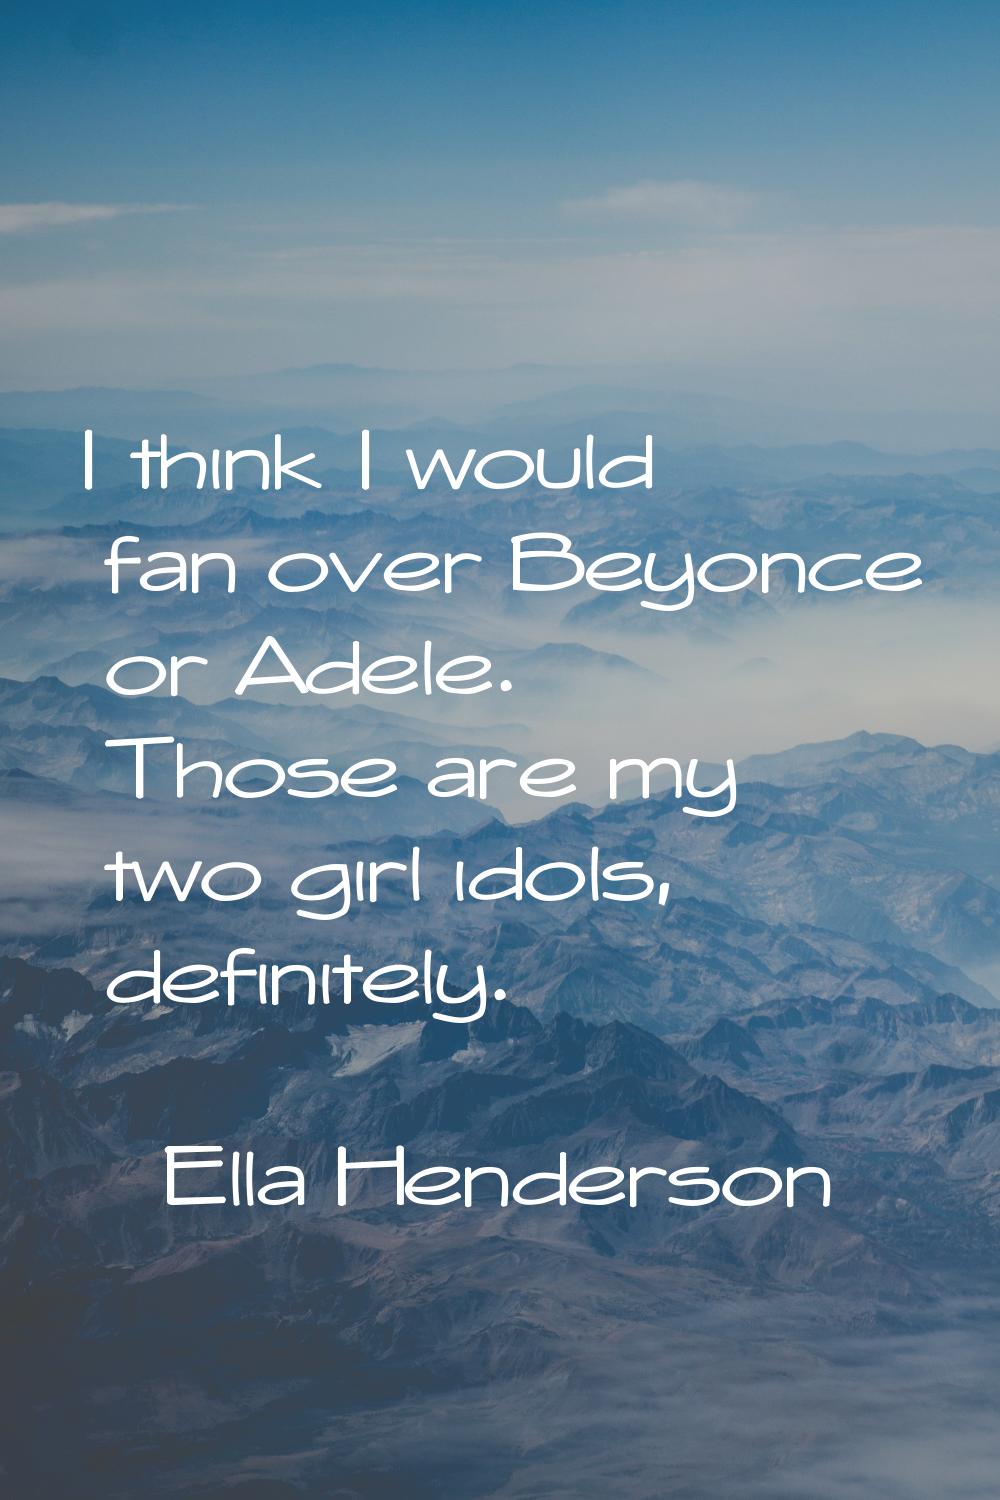 I think I would fan over Beyonce or Adele. Those are my two girl idols, definitely.